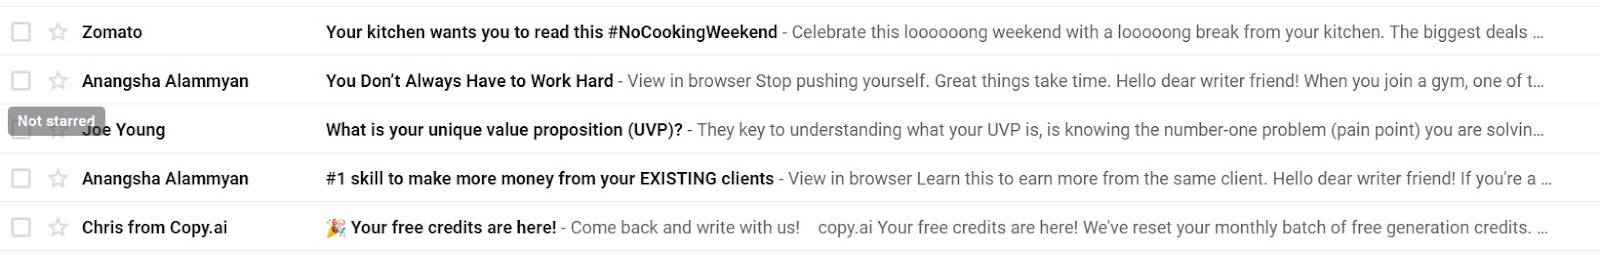 Good subject lines - examples